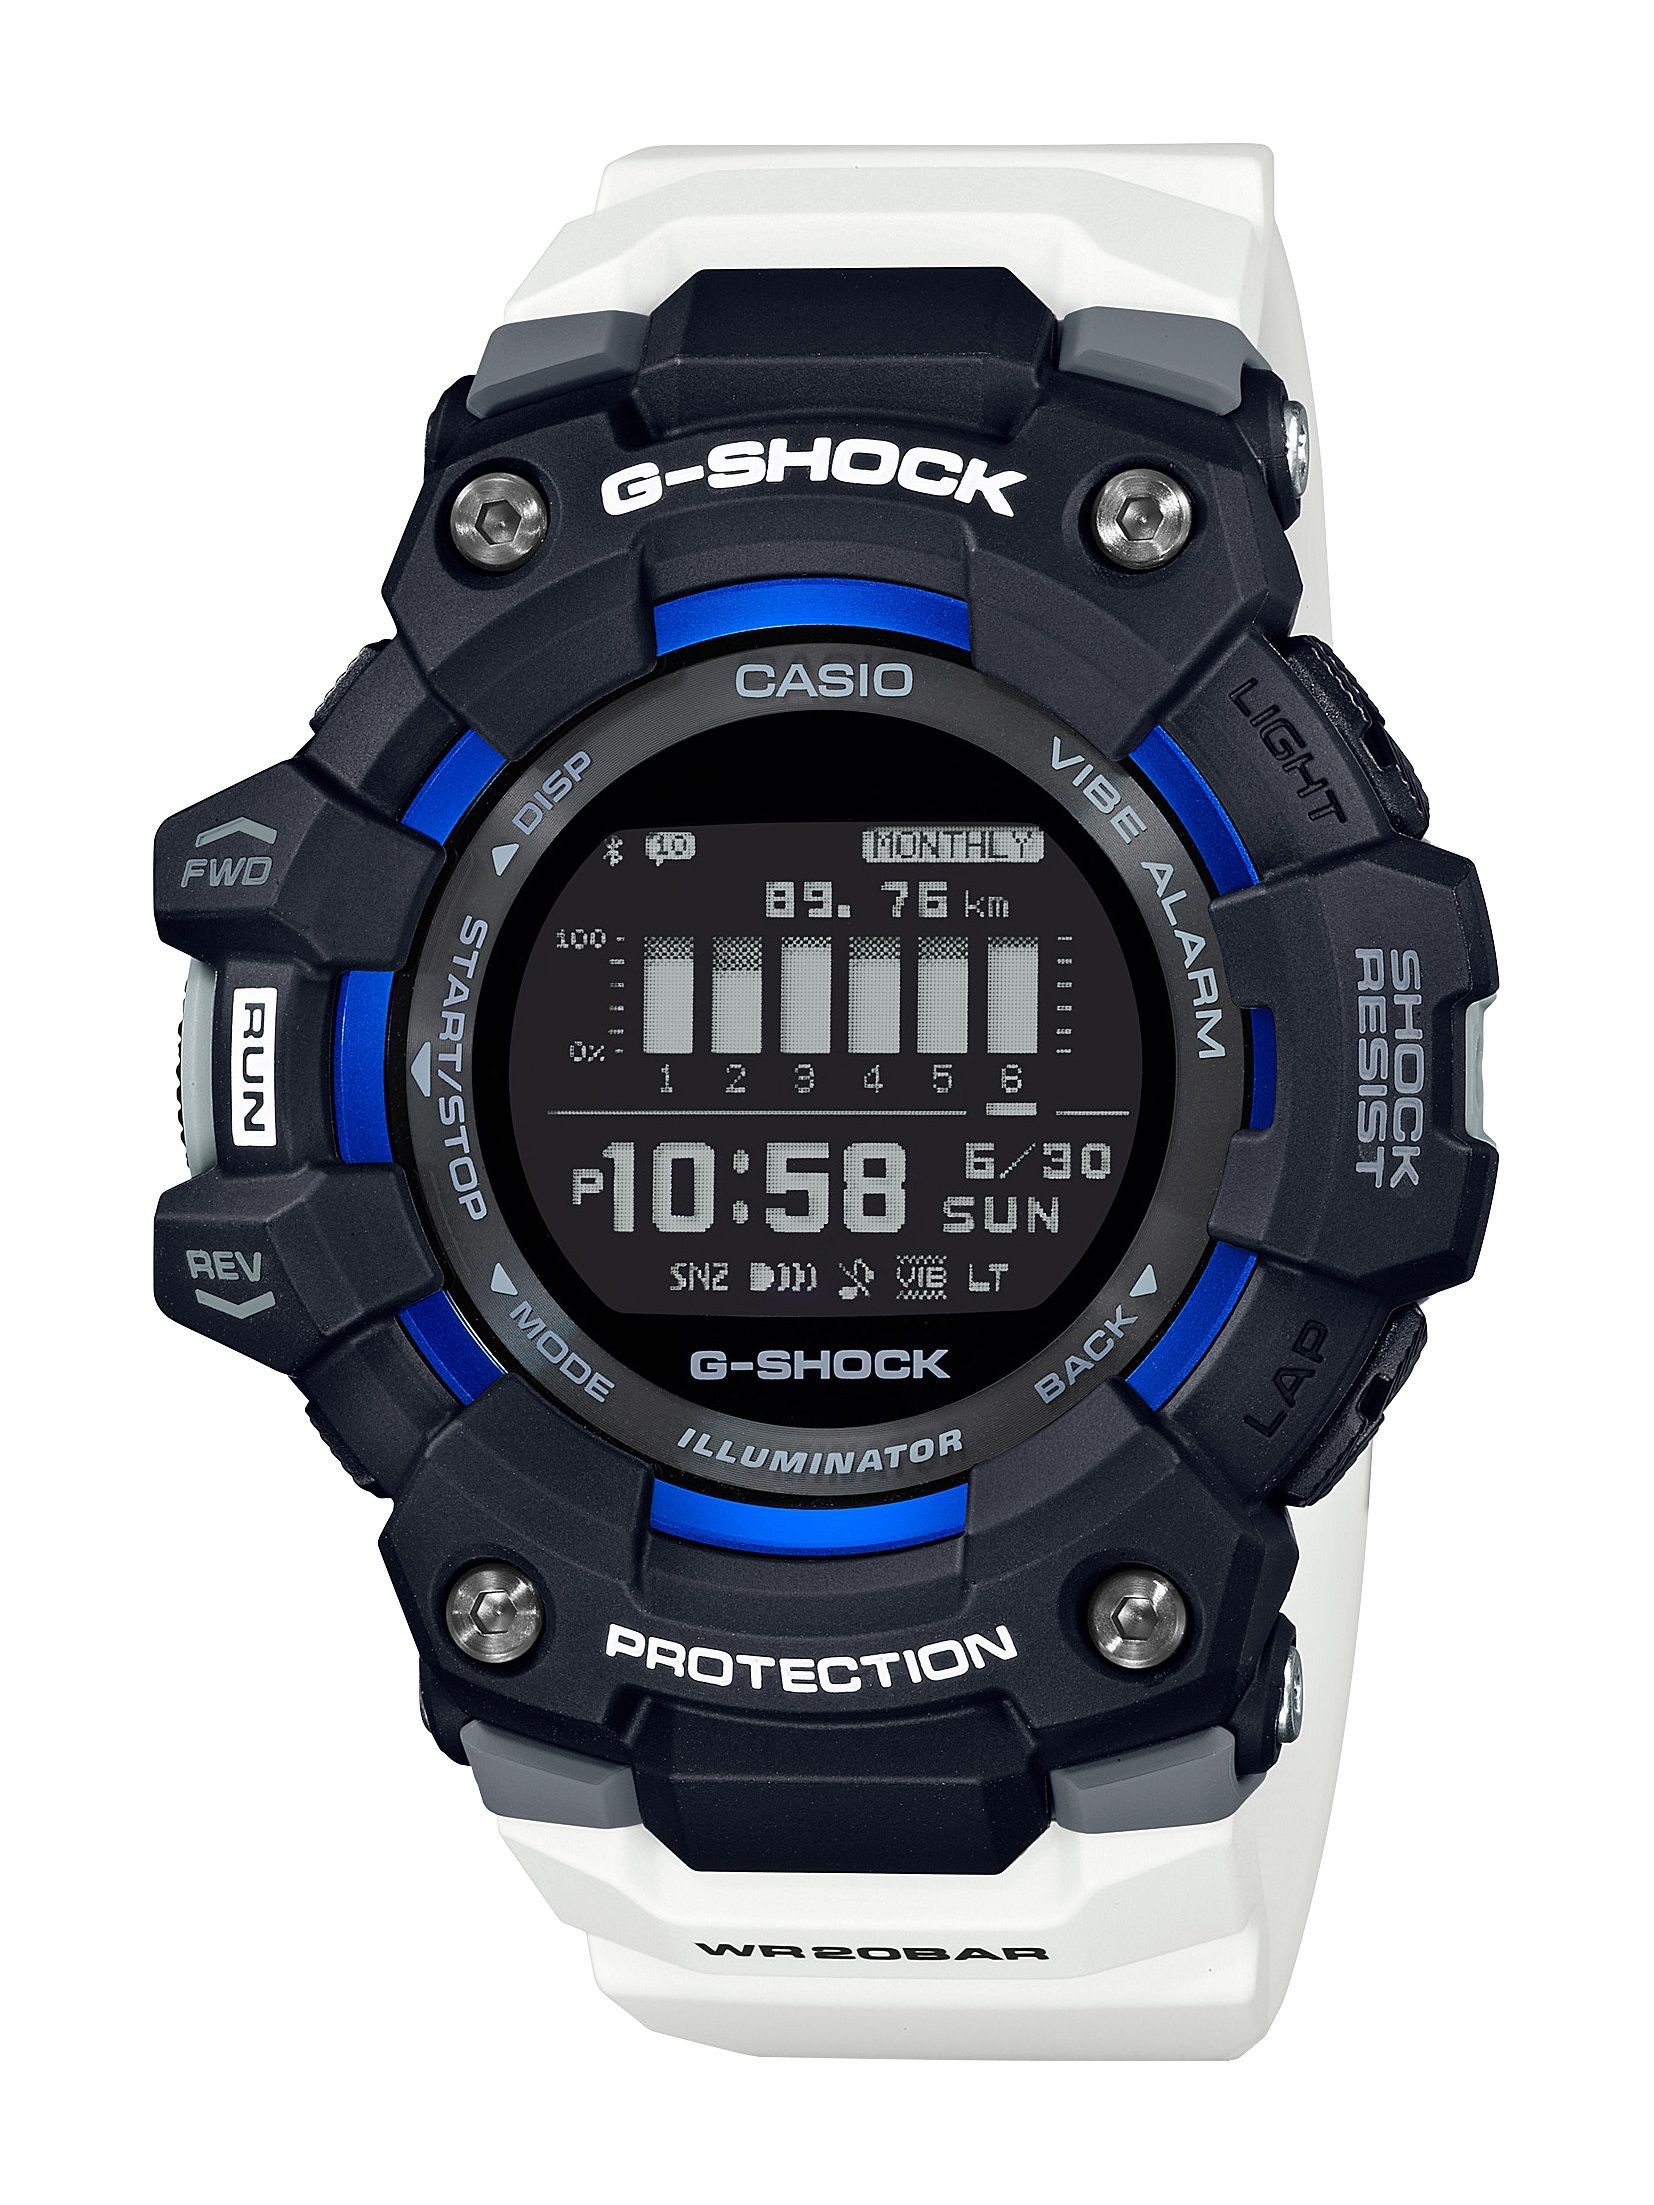 Casio G-Shock Move G-Squad Power Trainer GBD100 with Bluetooth Mobile Link Digital Watch - Black/Blue